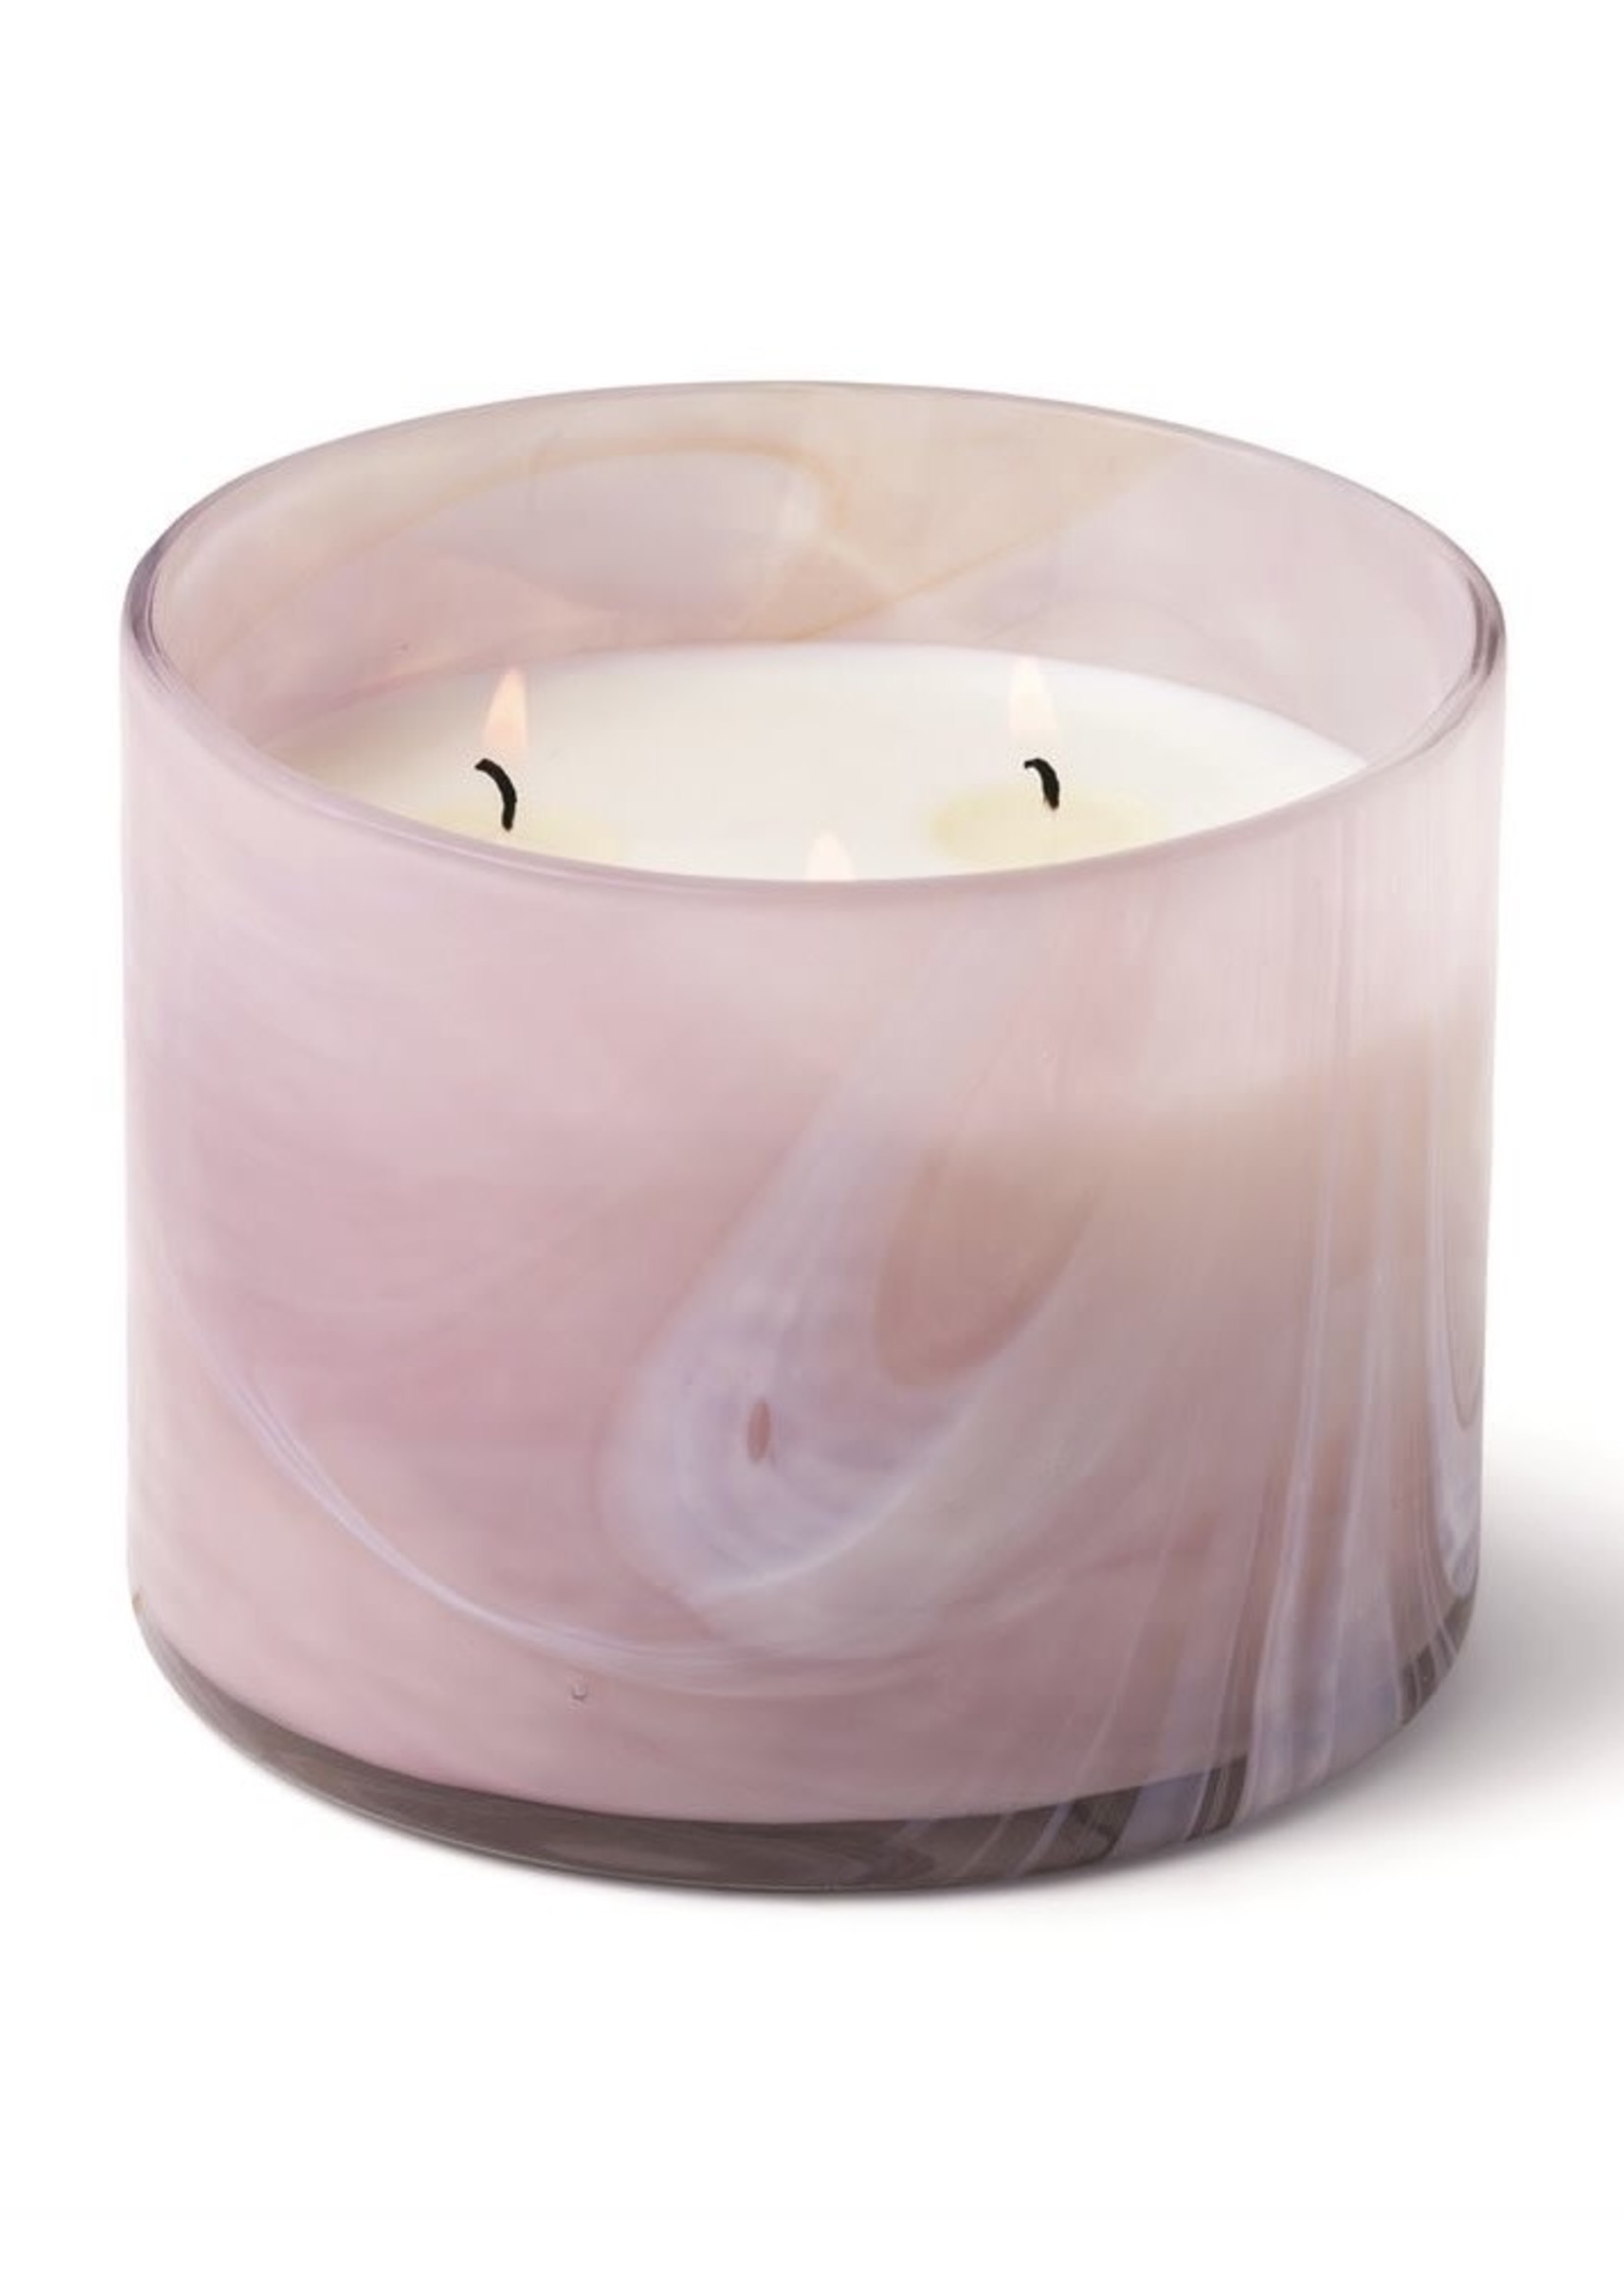 Paddywax "Whirl" Candle by Paddywax